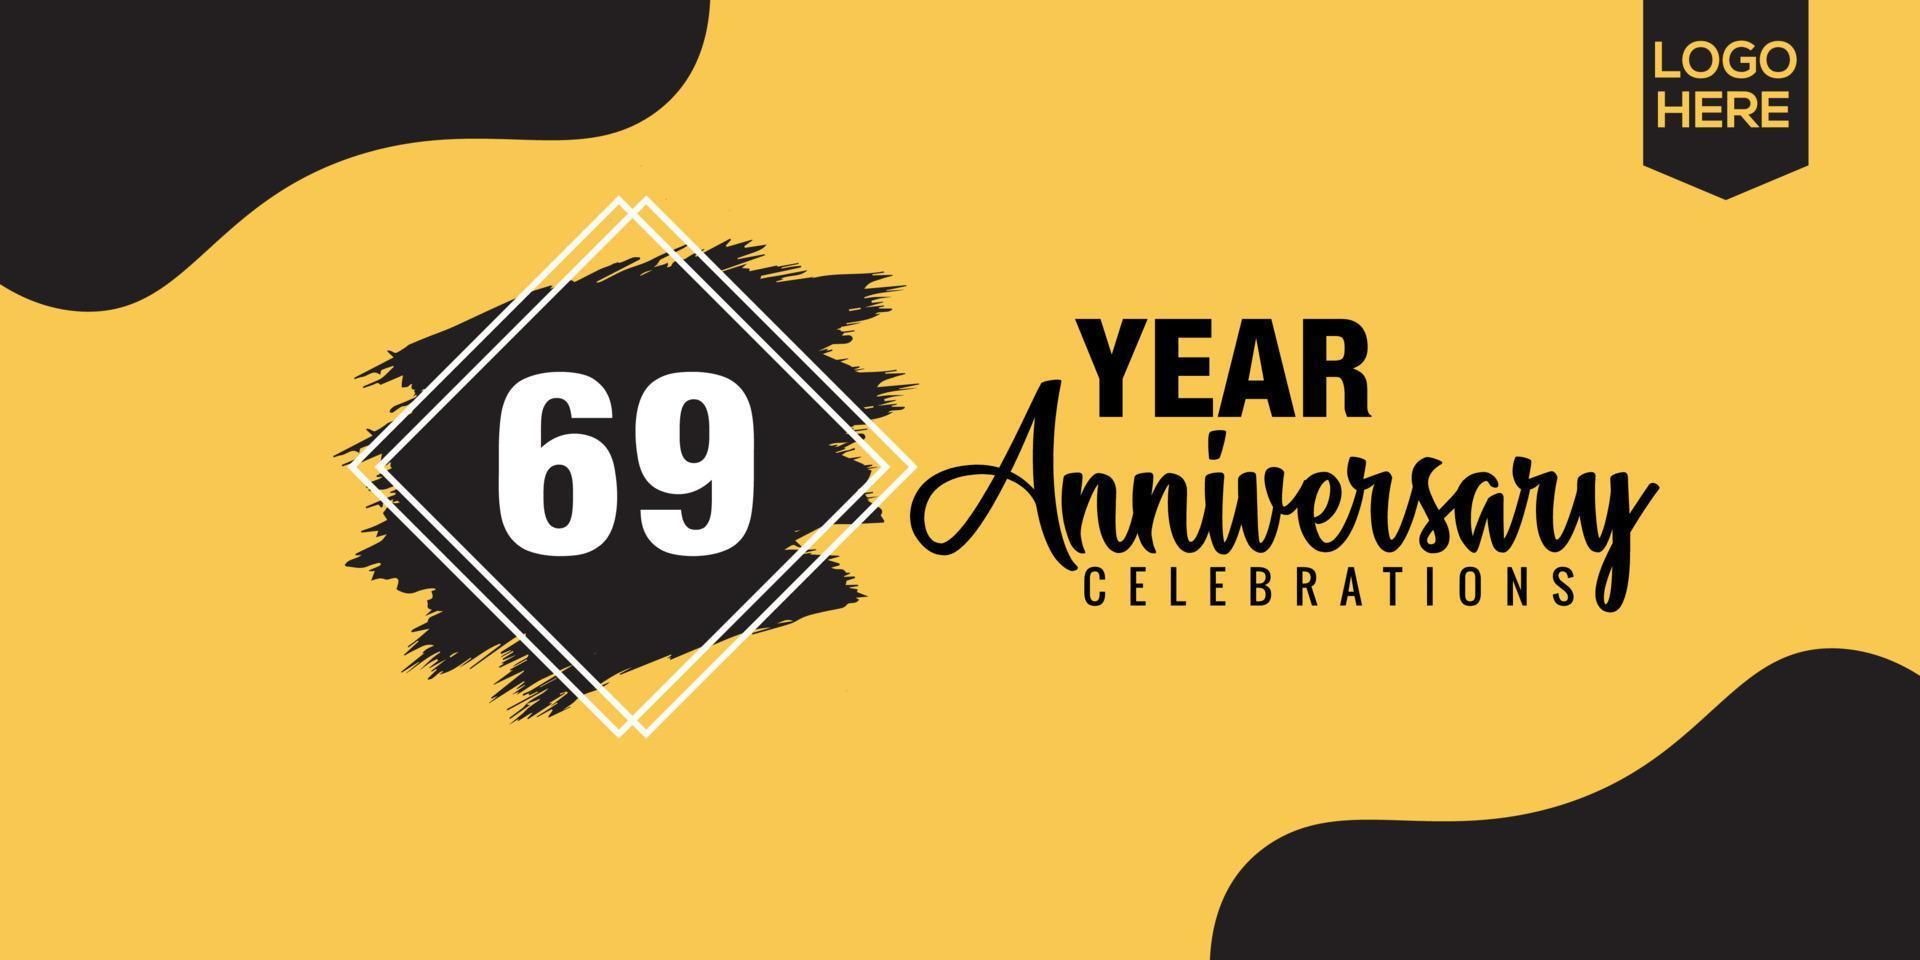 69th years anniversary celebration logo design with black brush and yellow color with black abstract vector illustration